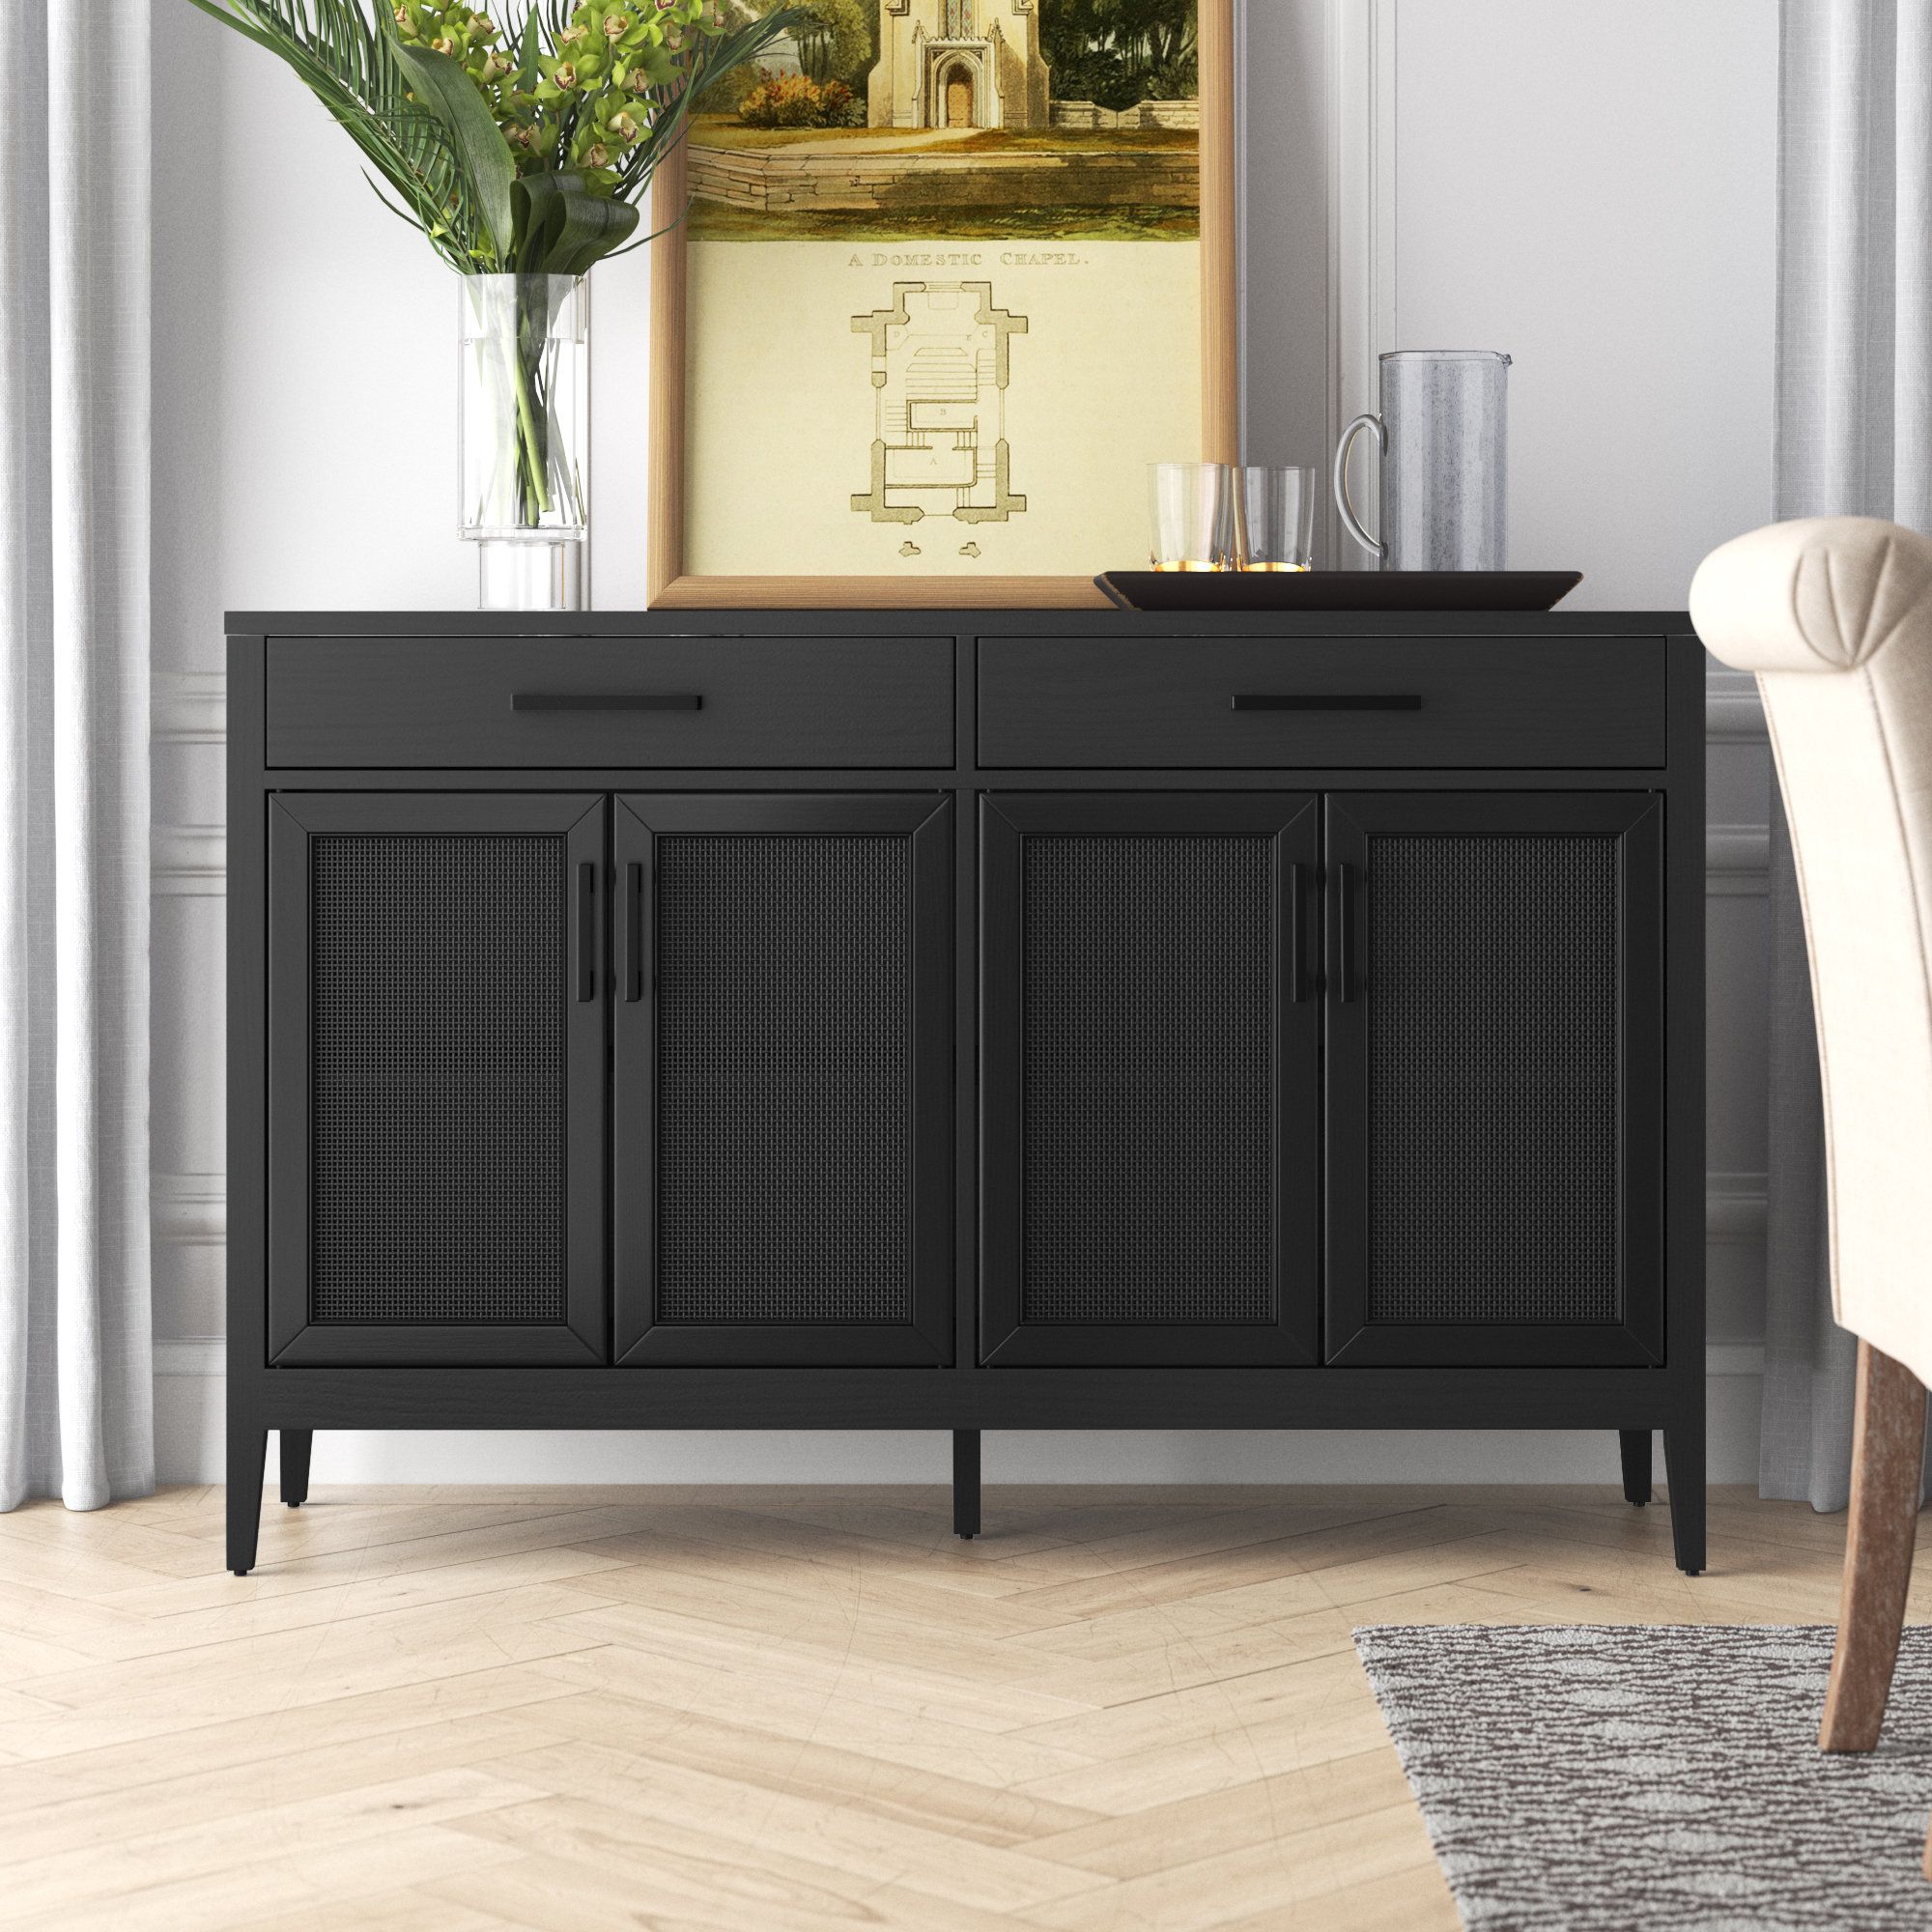 Greyleigh™ Newhaven 56'' Sideboard & Reviews | Wayfair In Newest Sideboards For Entryway (View 10 of 15)